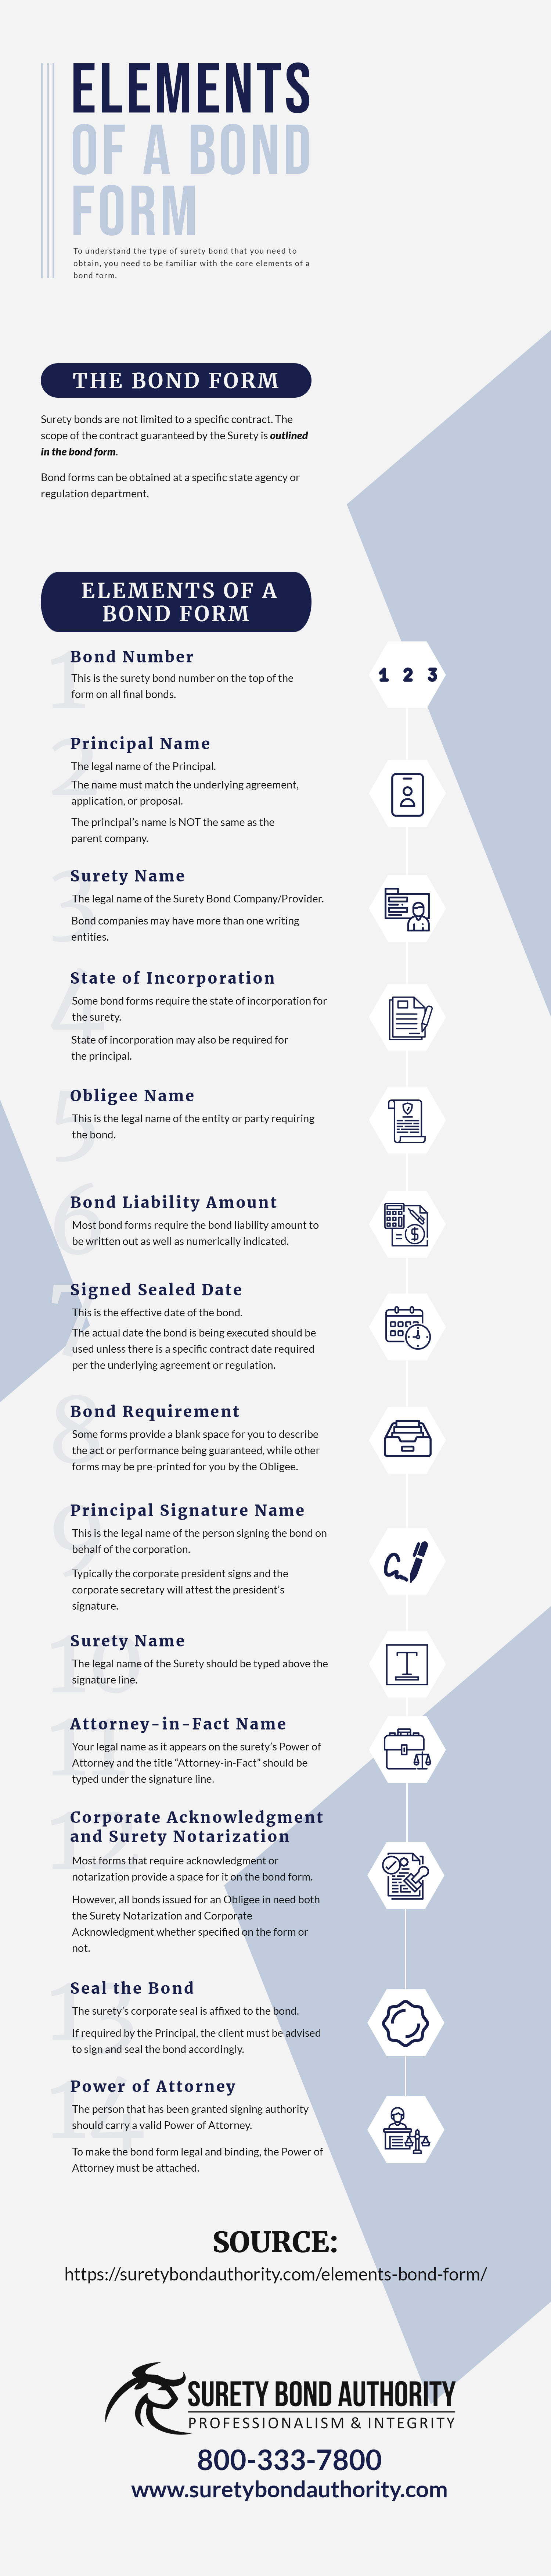 Elements of a Bond Form Infographic